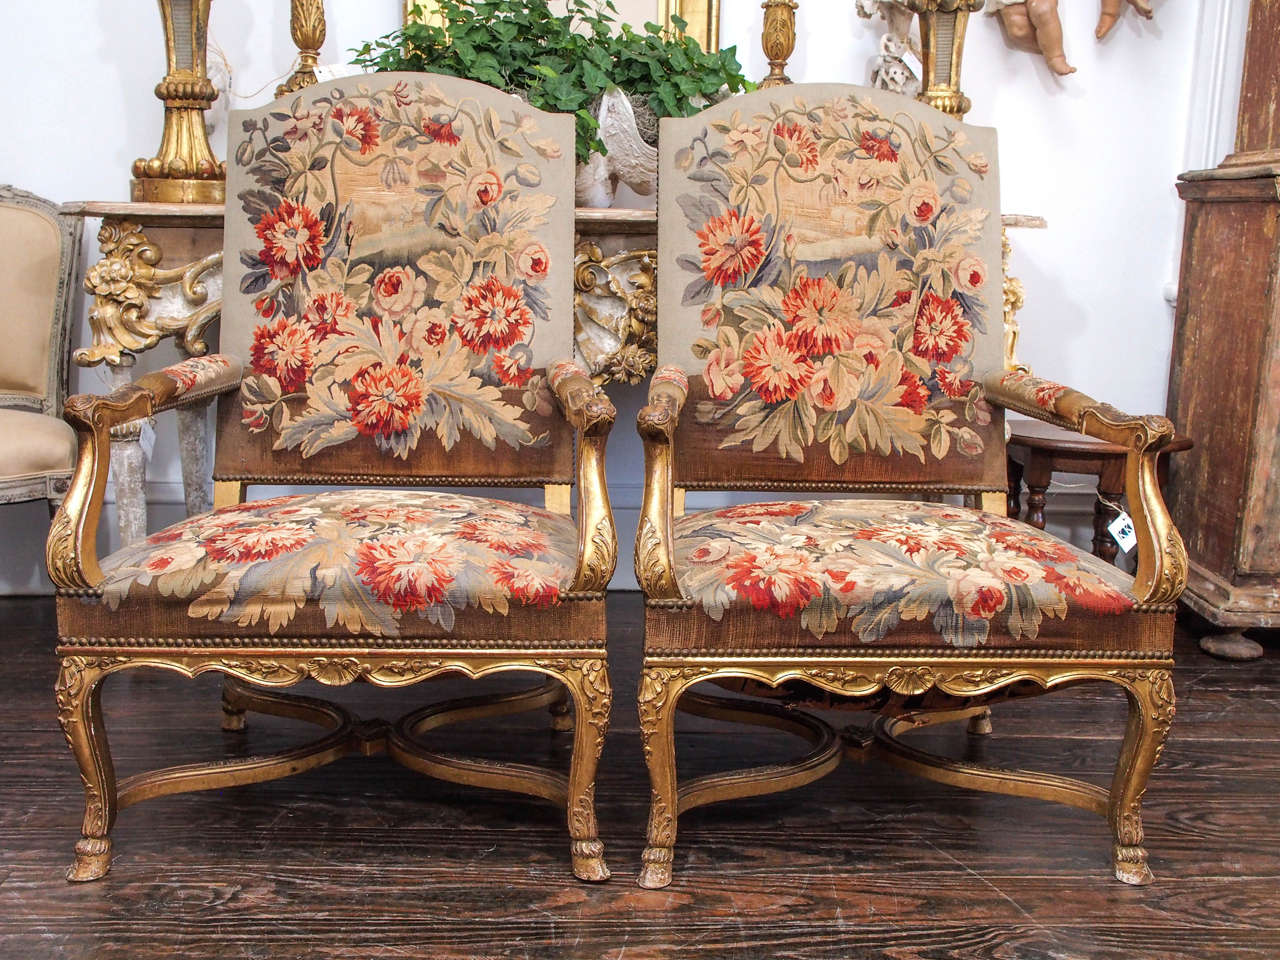 Louis XV French 19th century gilded chairs with hoof foot, Regence.